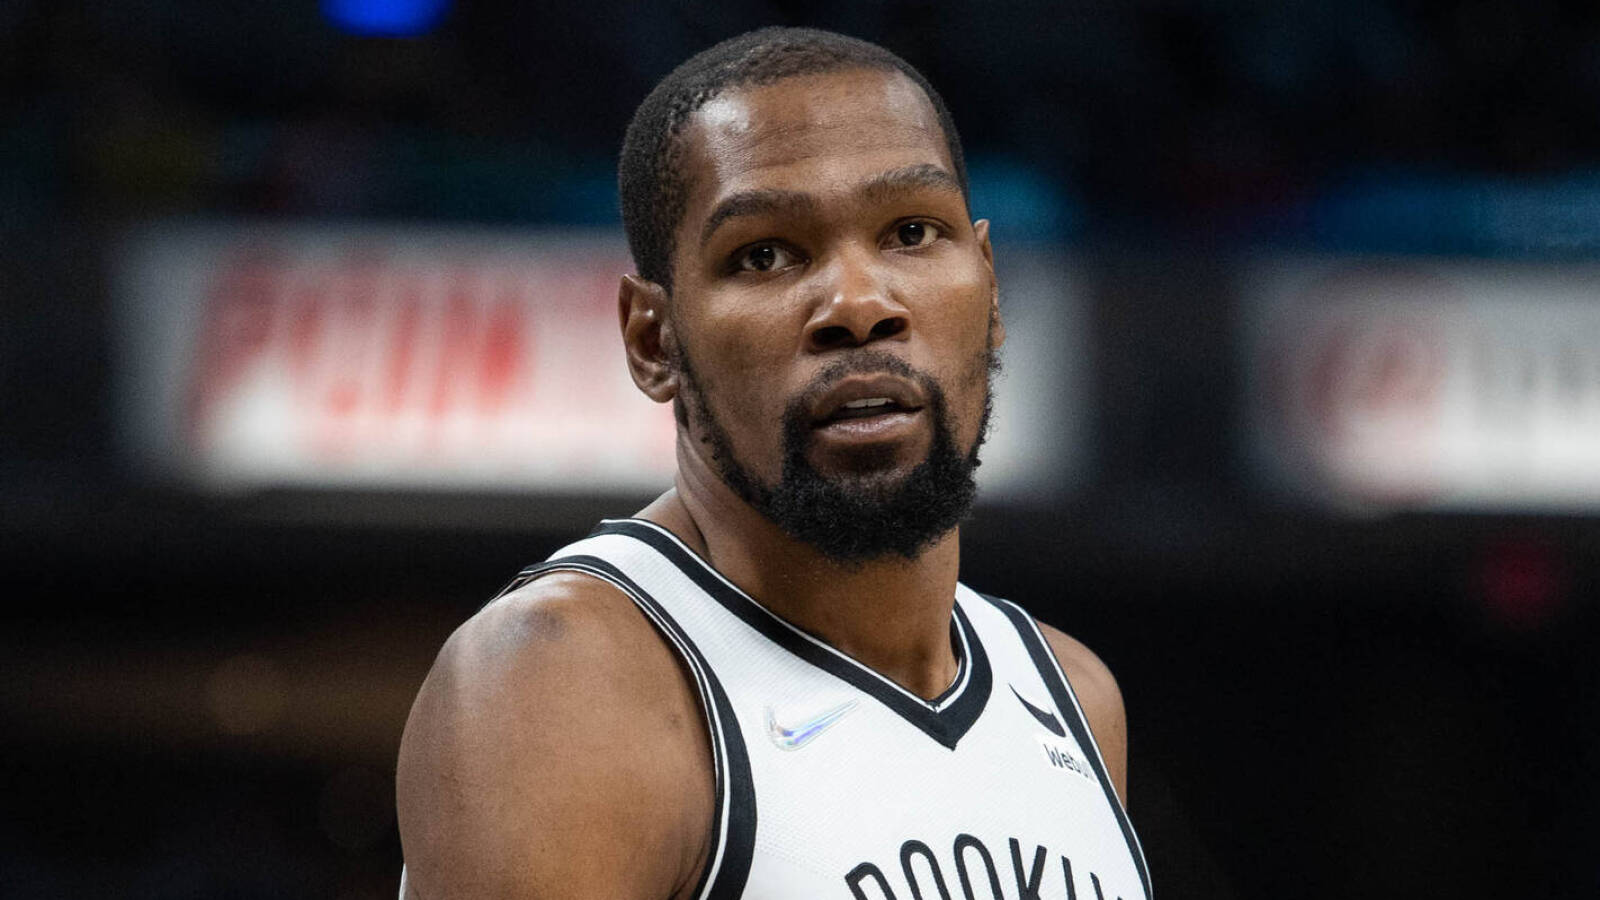 Kevin Durant to miss All-Star Game ceremony due to death of grandmother